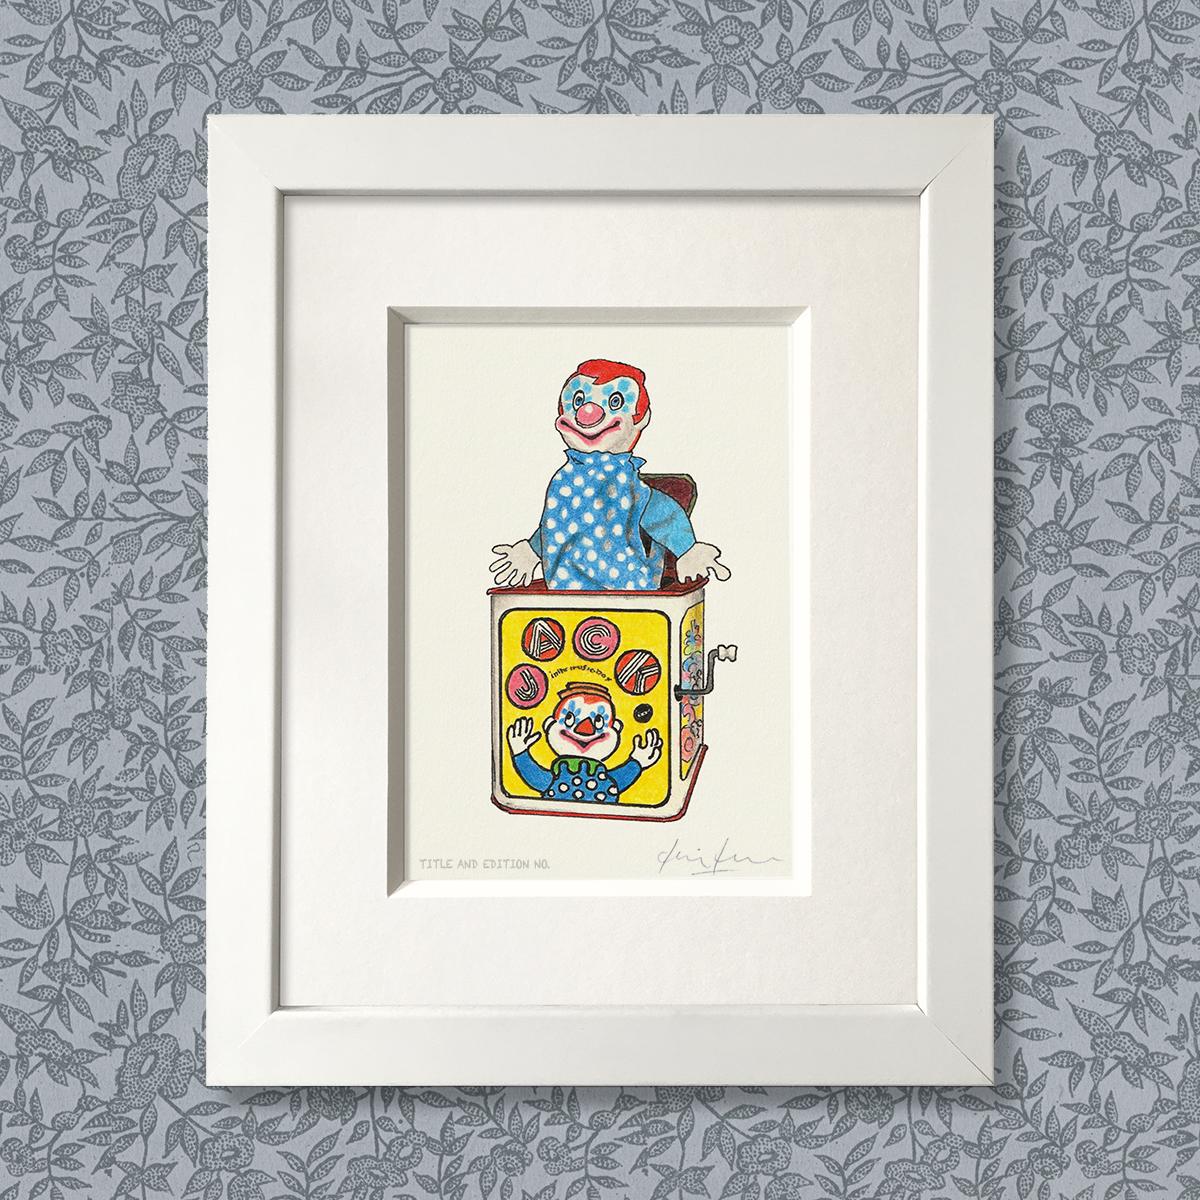 Limited edition print from a pen, ink and coloured pencil drawing of a Jack in the Box in a white frame